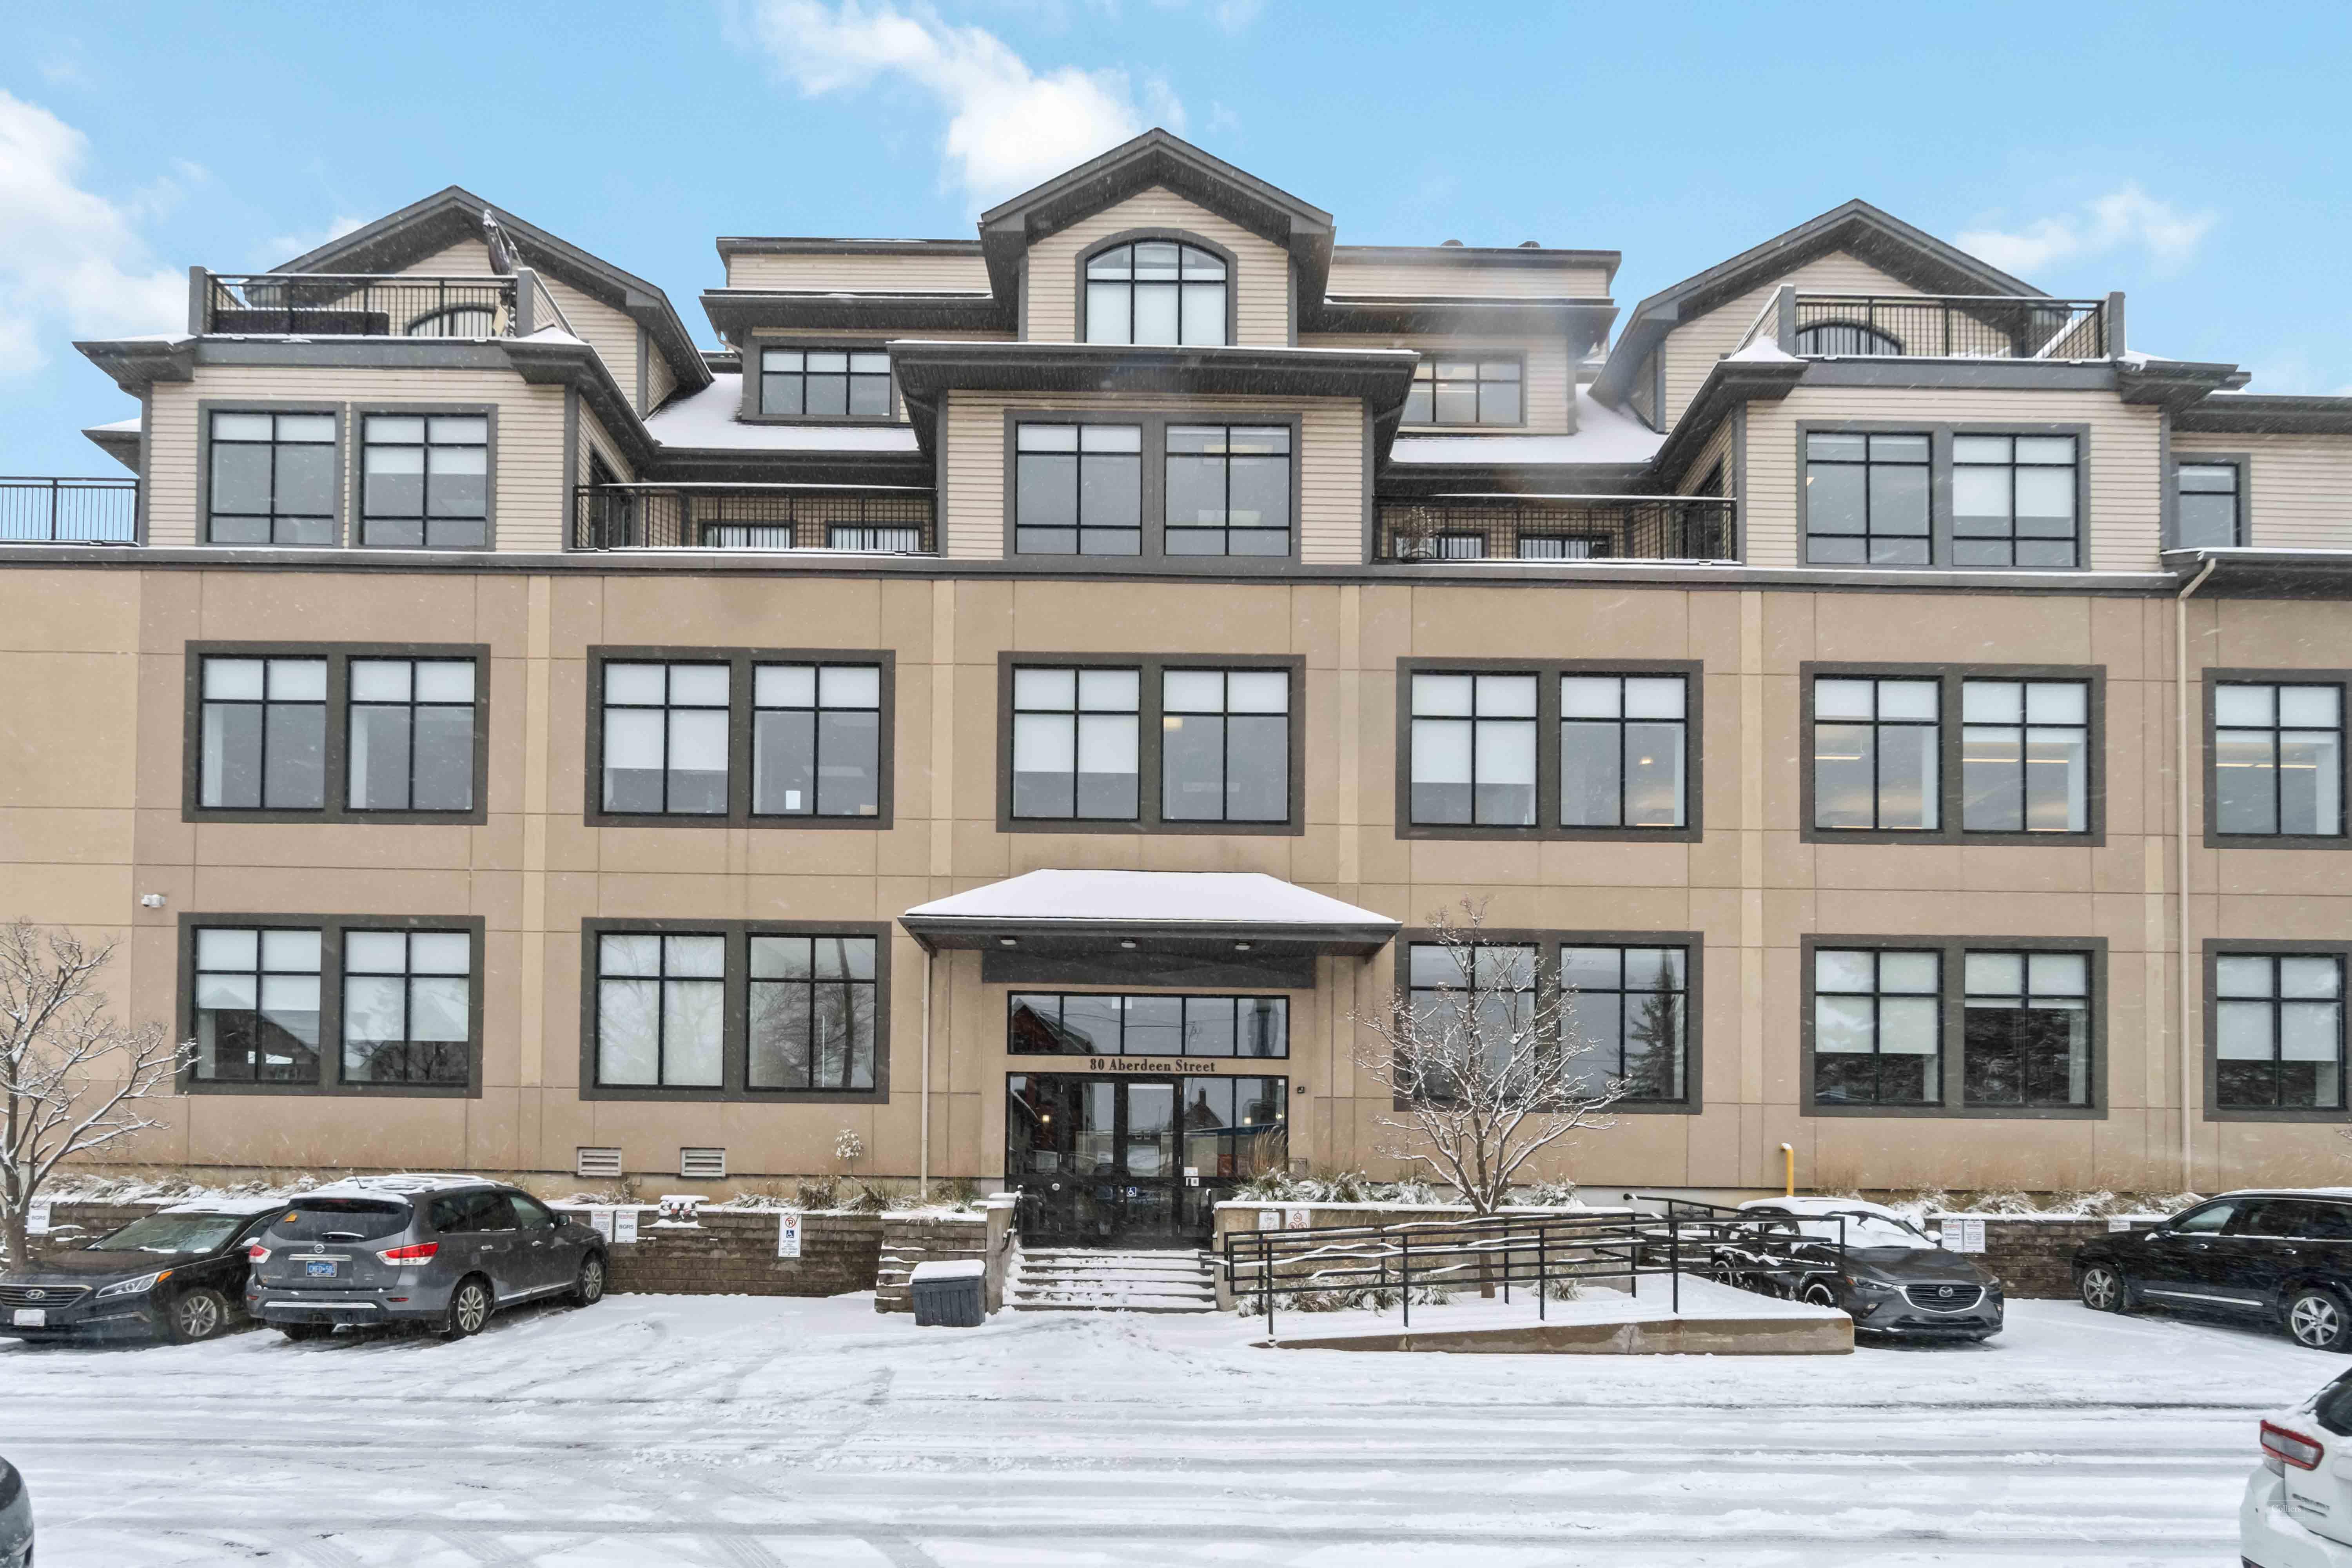 Canada 401, Street, Ontario, Aberdeen — For Suite Colliers | | Ottawa, 80 Canada Office Lease